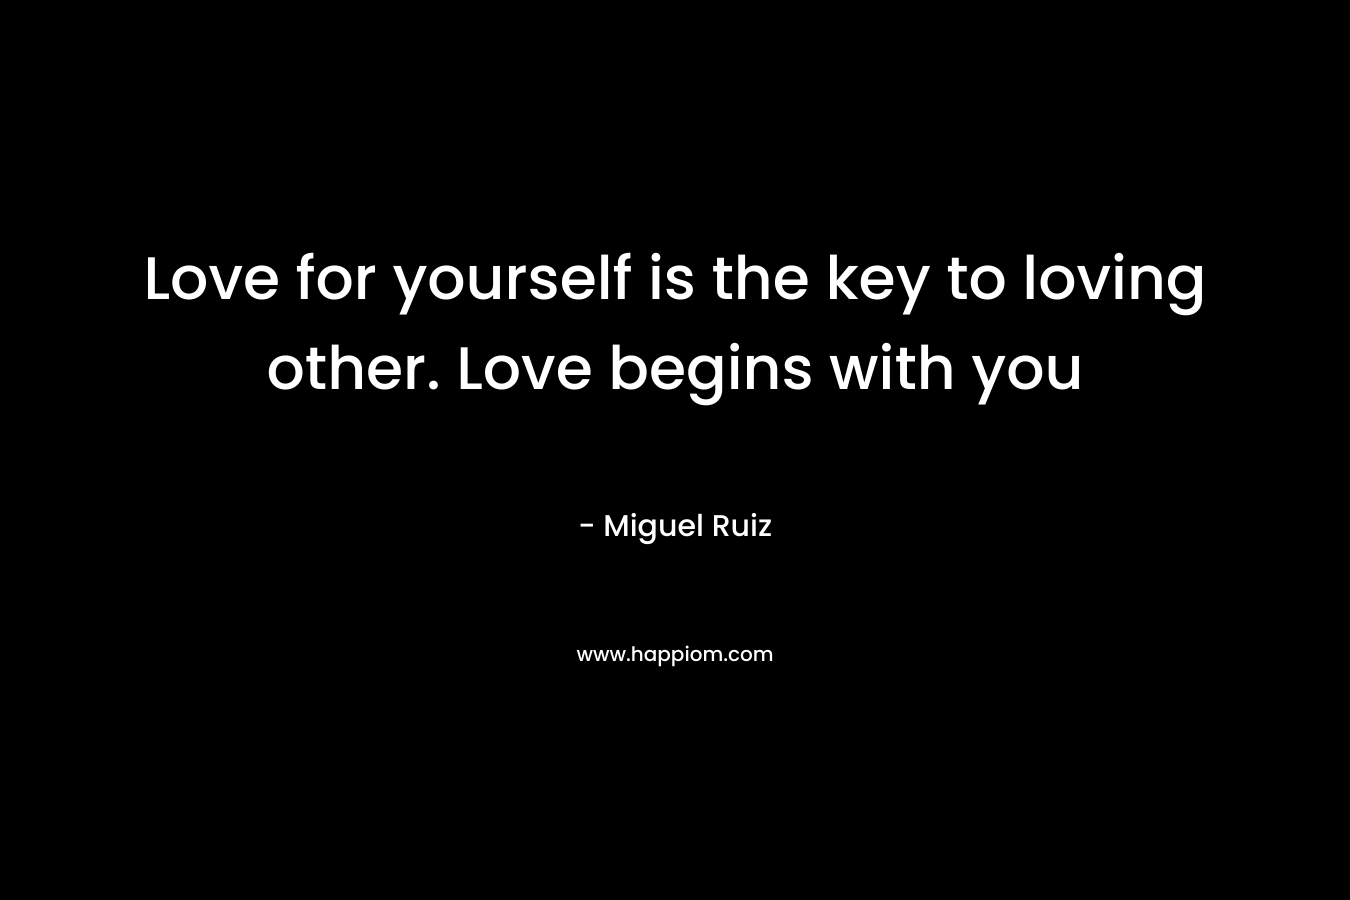 Love for yourself is the key to loving other. Love begins with you